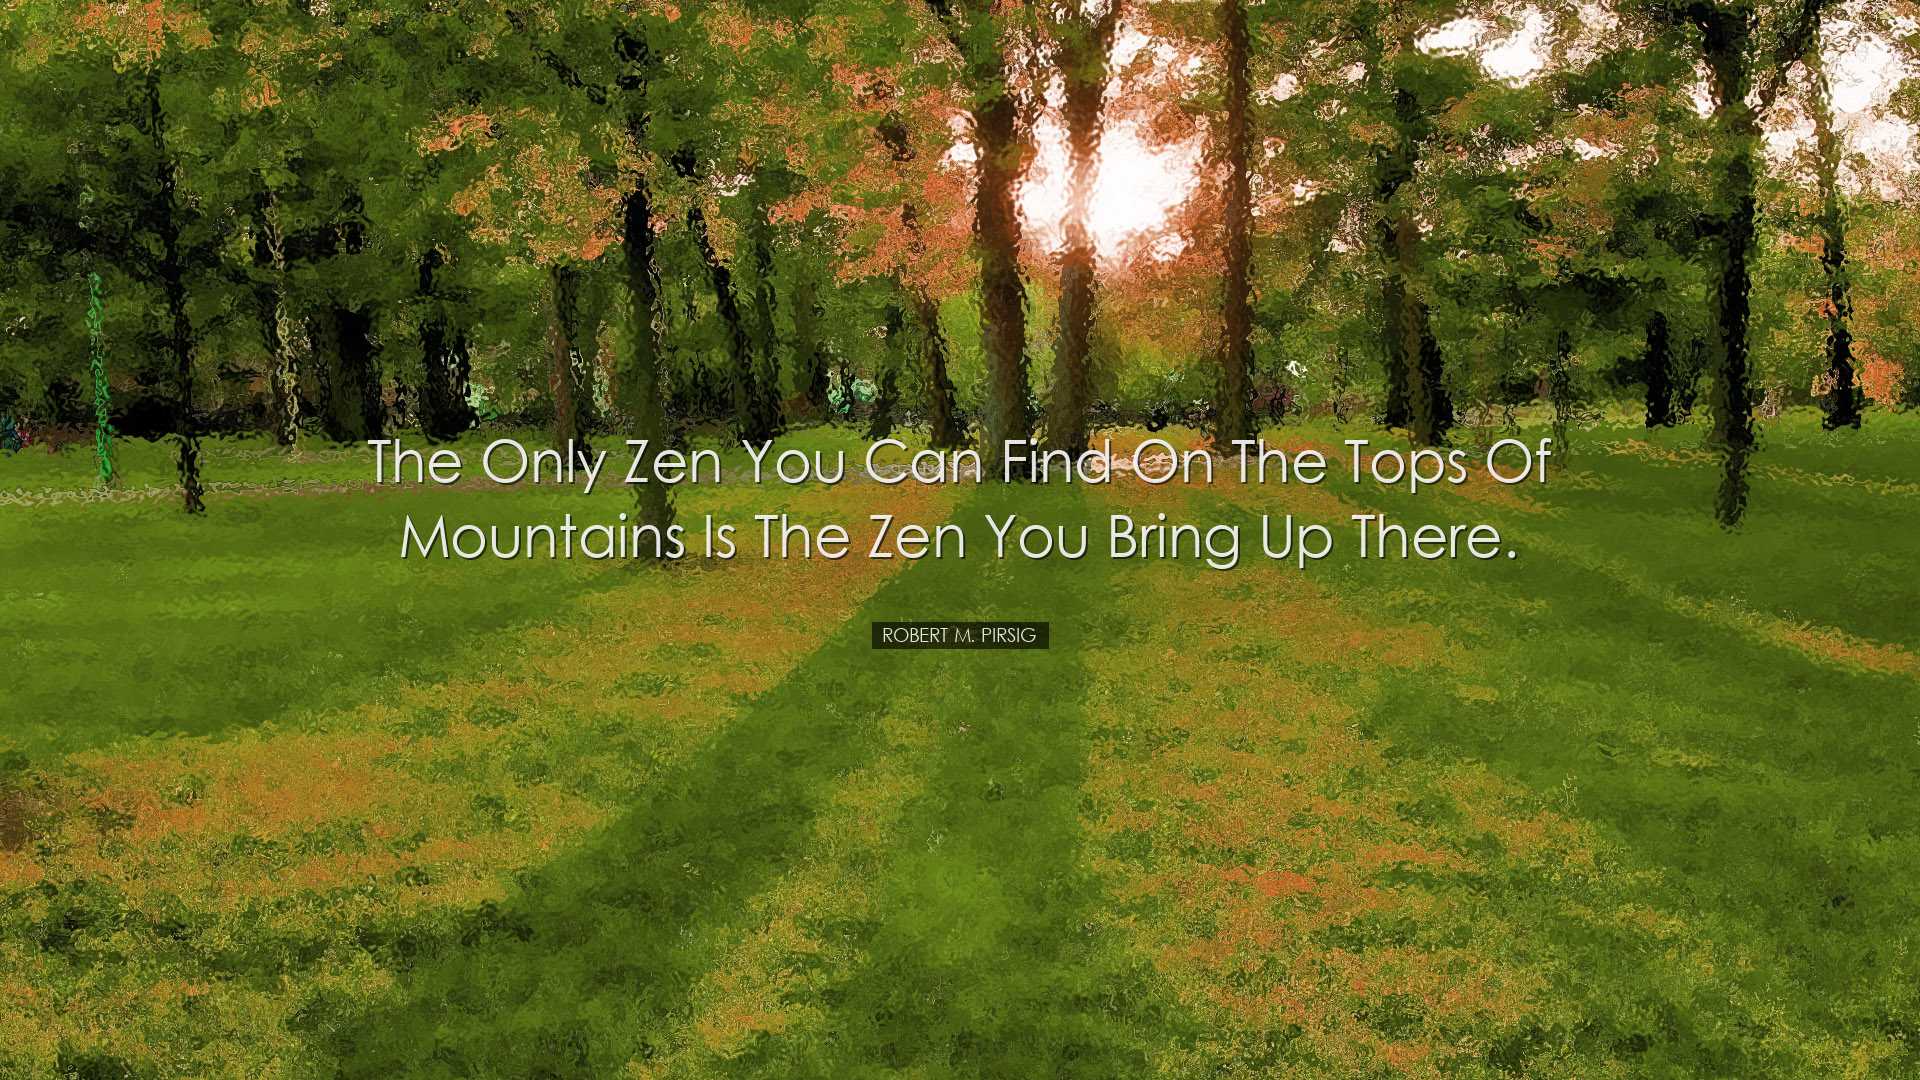 The only Zen you can find on the tops of mountains is the Zen you